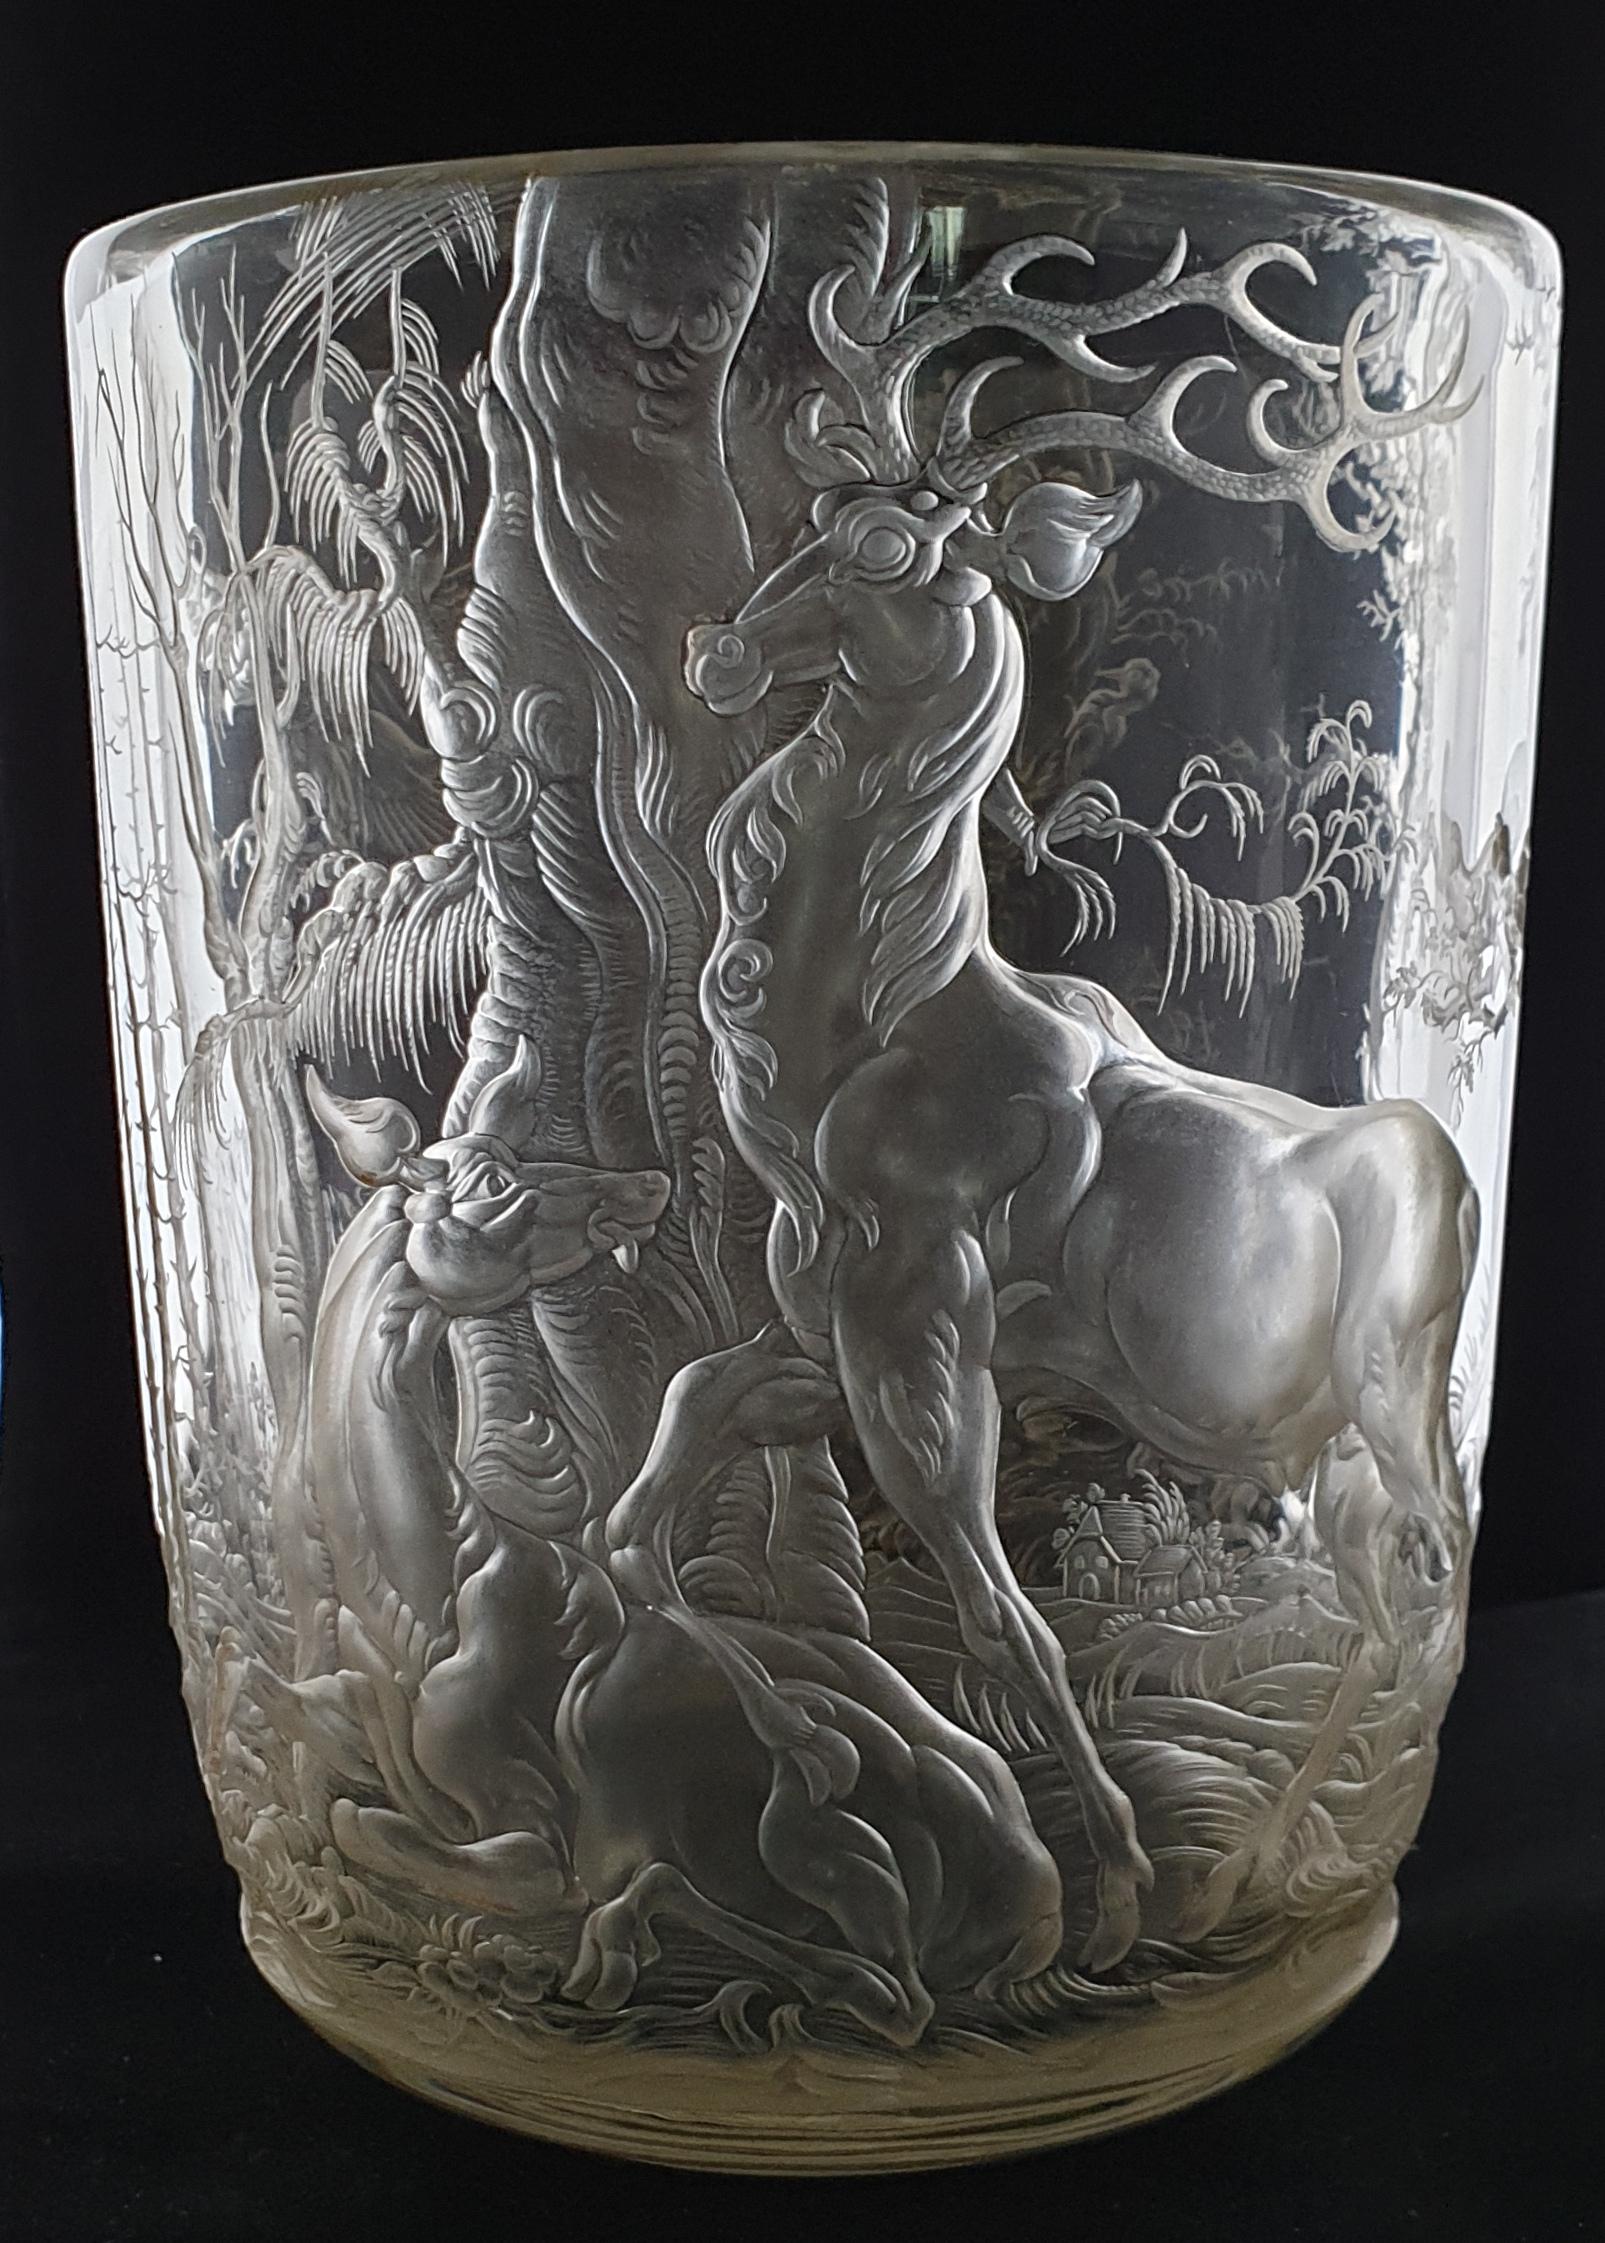 An important example from this famous engraver. Bischof learned glass engraving at Steinschonau, then joined the firm of J&L Lobmeyr in Vienna, where he stayed until 1914. 

His work caused a sensation at the World’s Fair in 1925, and he received